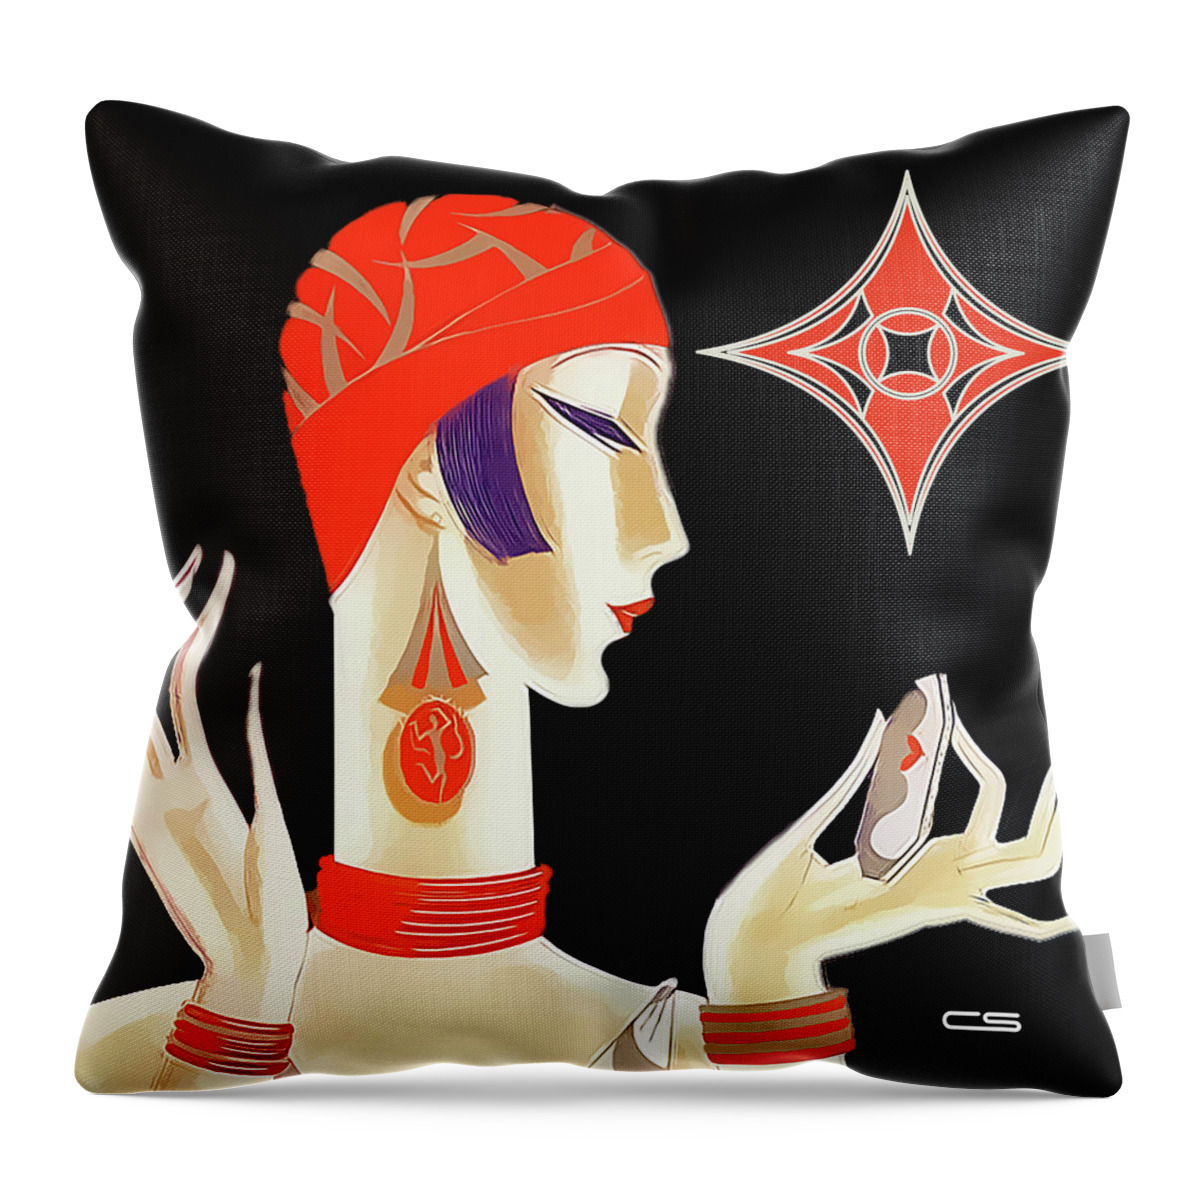 Staley Throw Pillow featuring the digital art Flapper Star by Chuck Staley